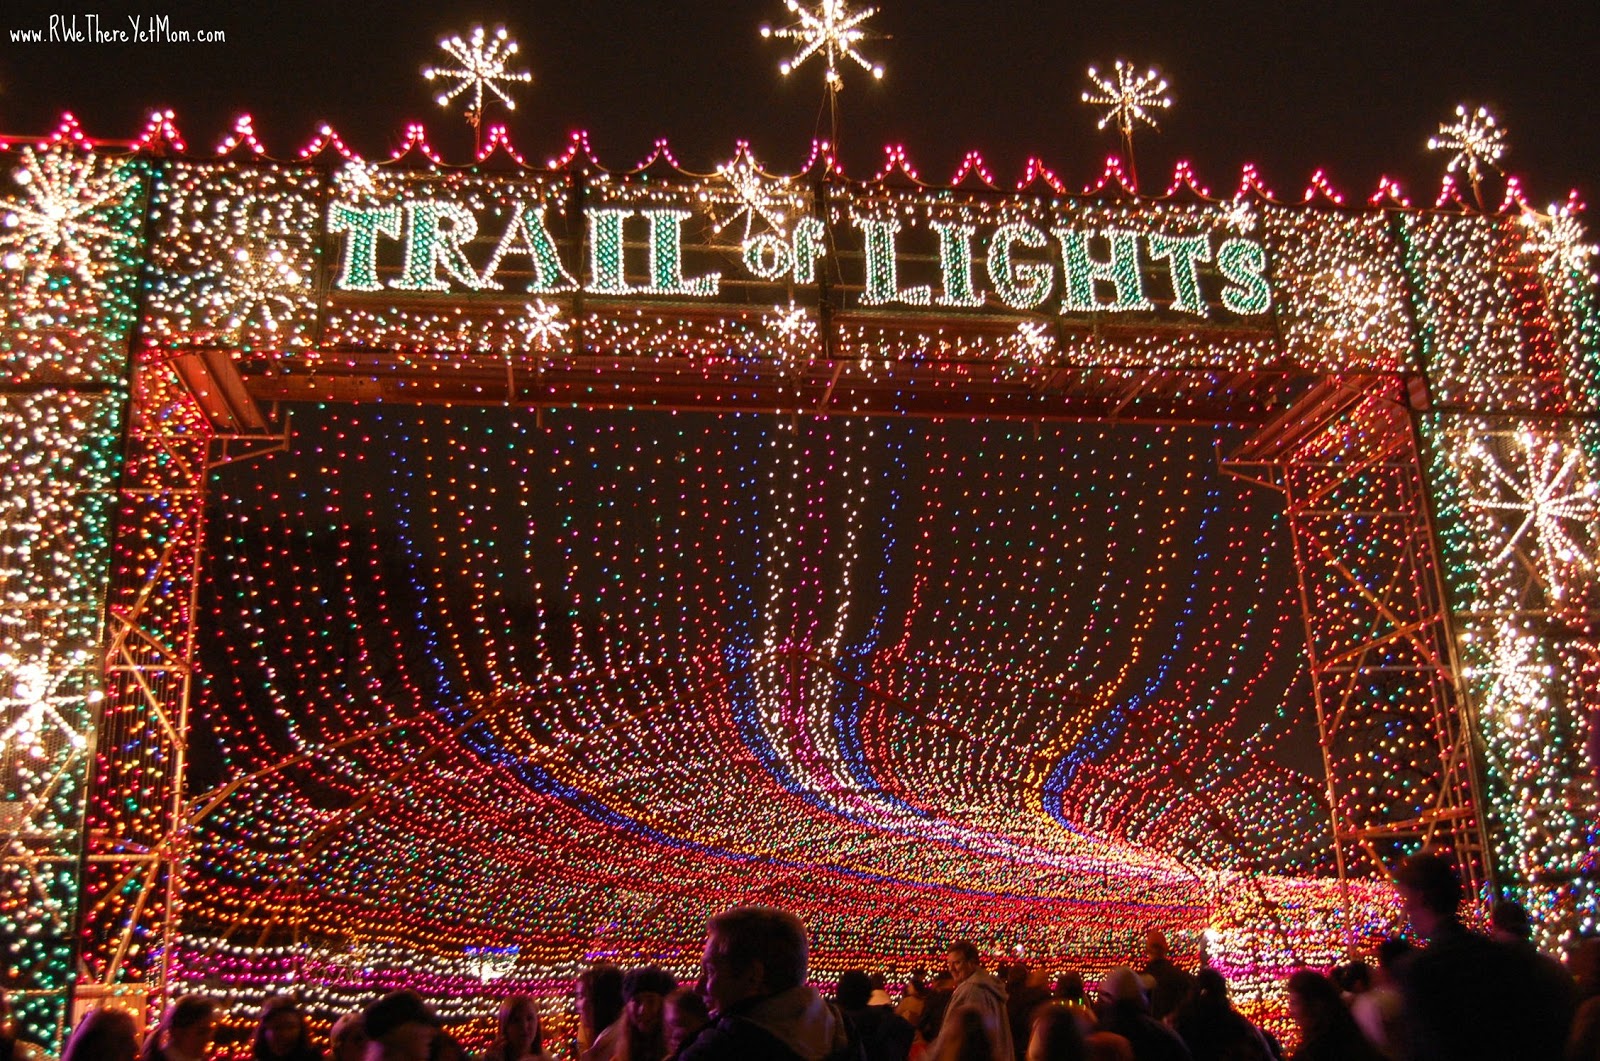 Trail of Lights Austin, TX R We There Yet Mom?